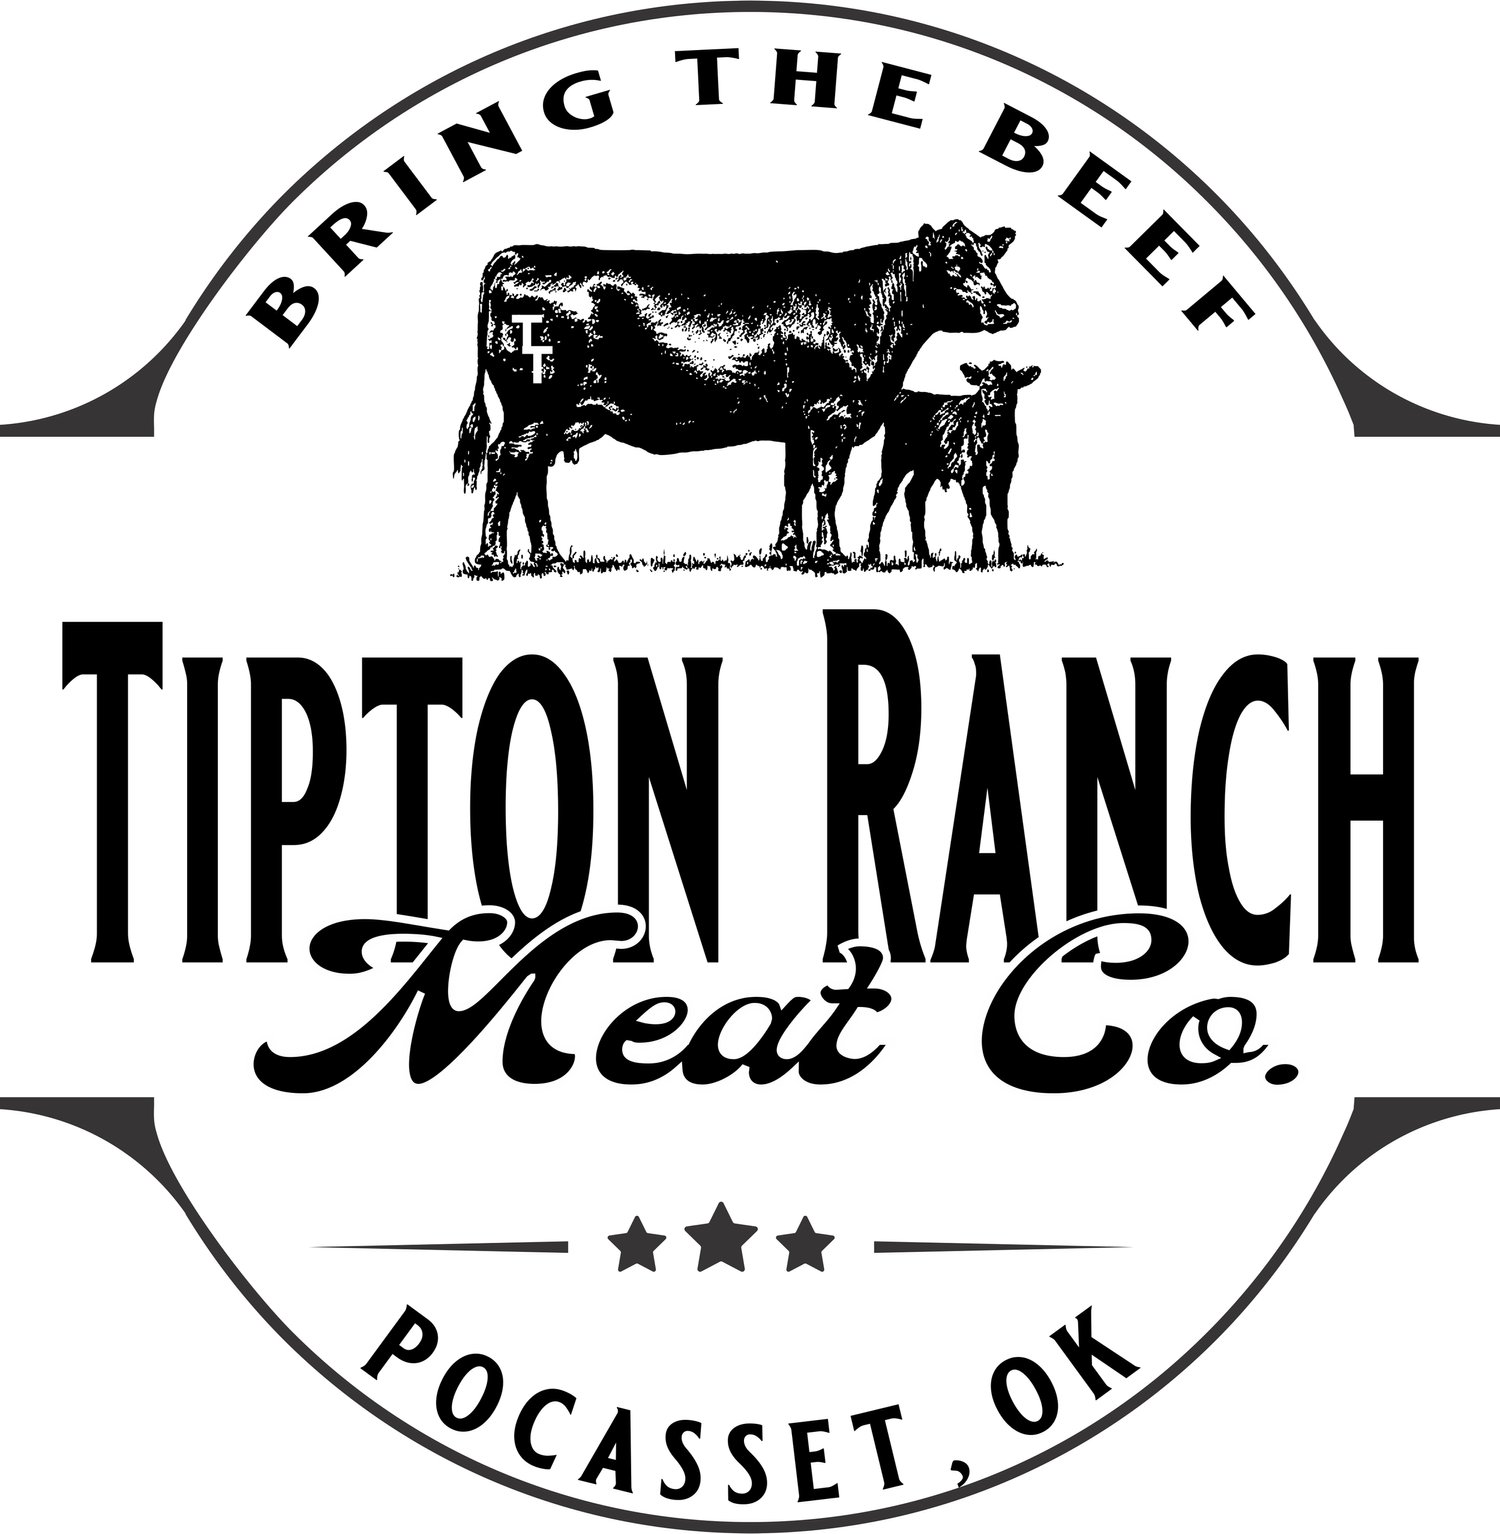 Tipton Ranch Meat Co.